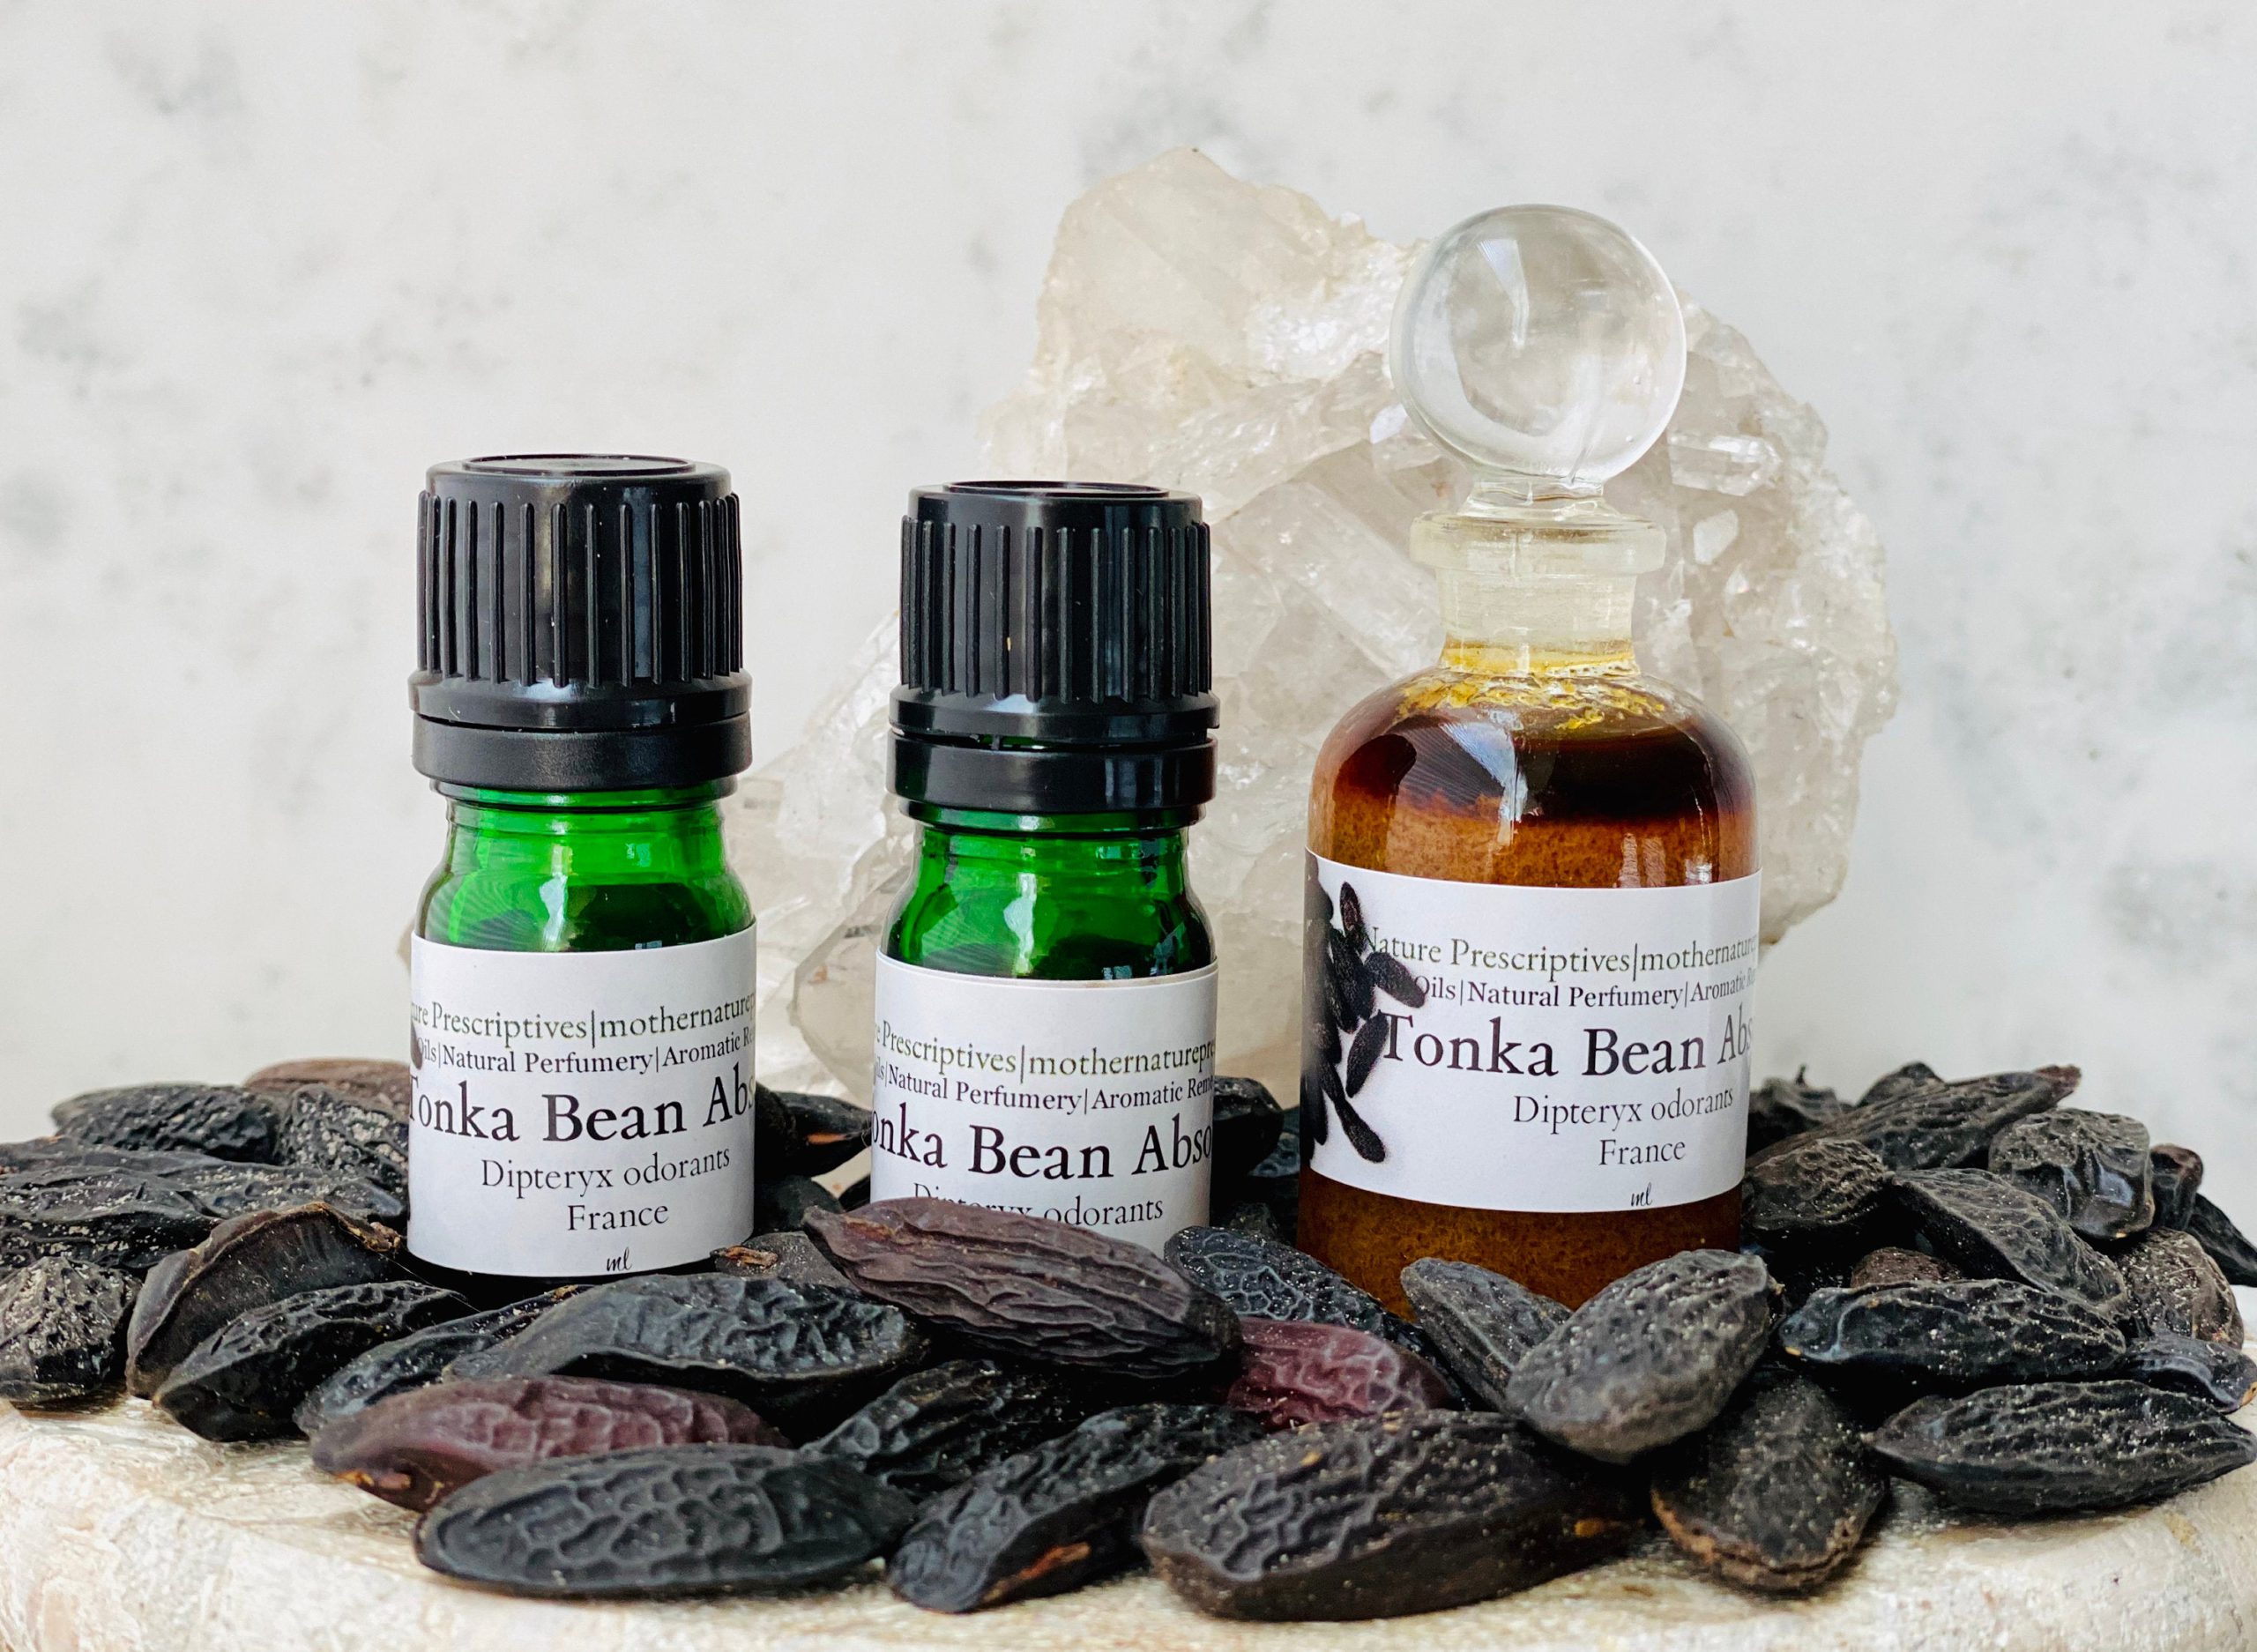 Sweet & Sensational Tonka Bean Absolute – Plant Therapy